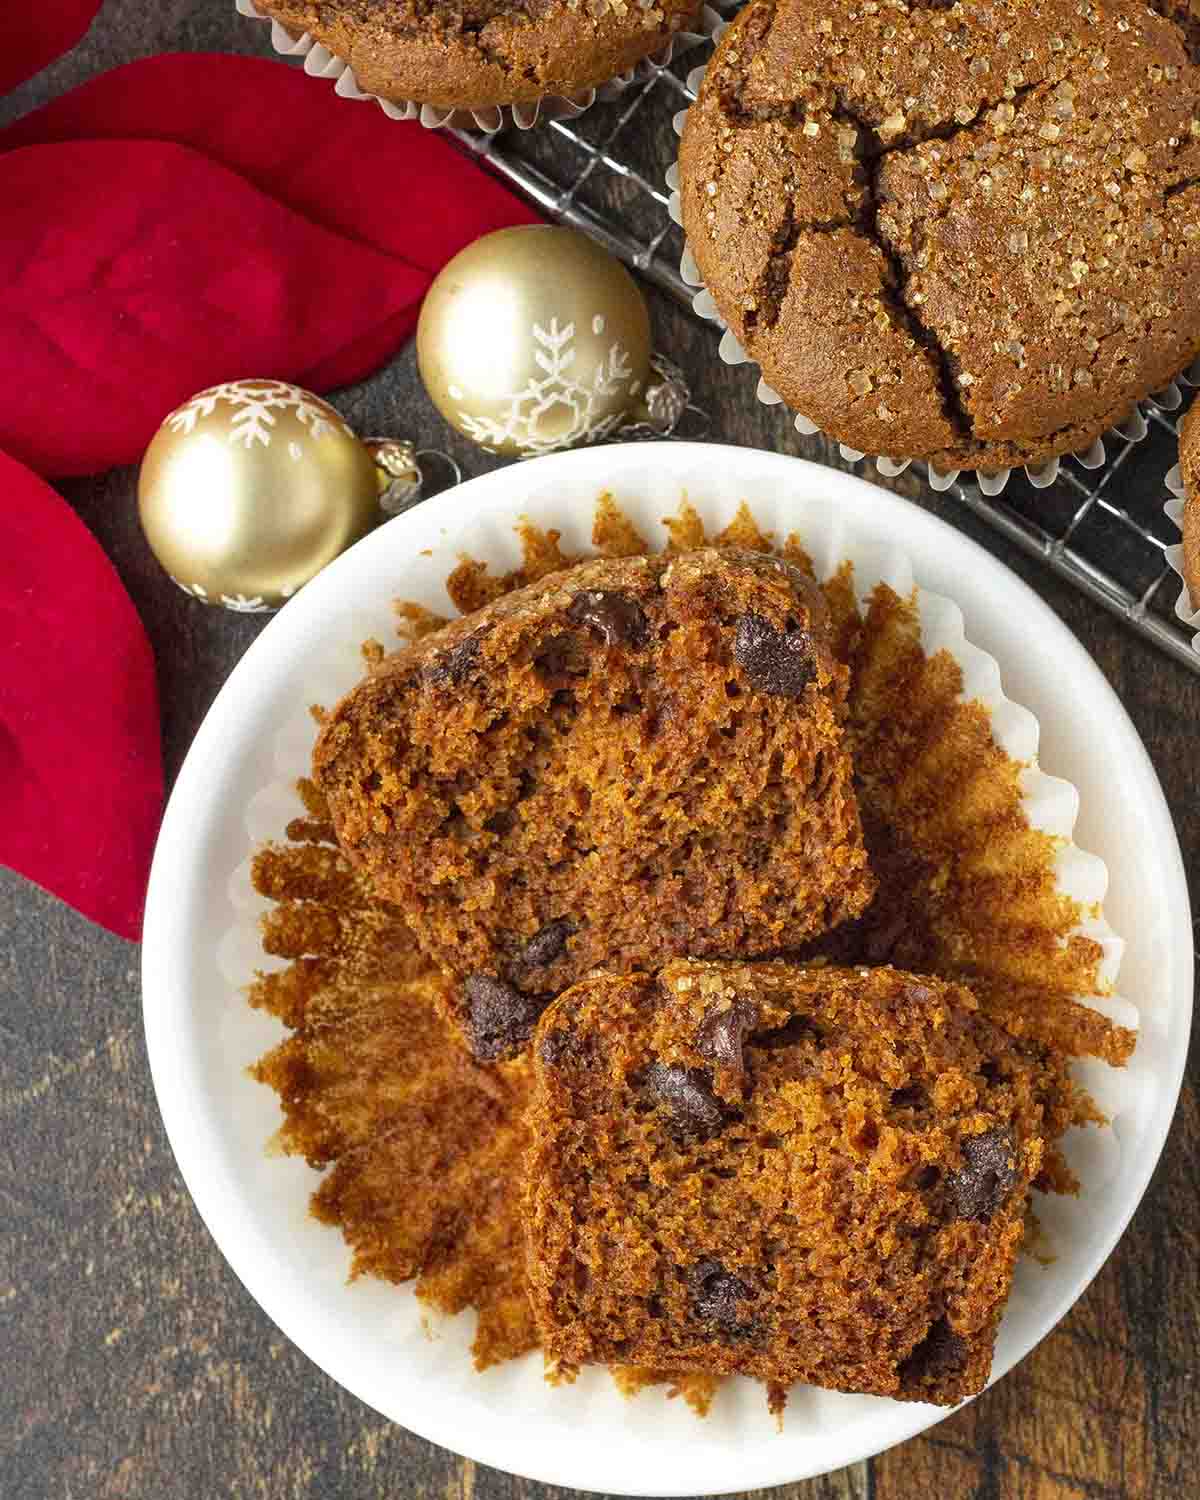 An overhead shot of a gingerbread chocolate chip muffin cut in half to show the fluffy inside.